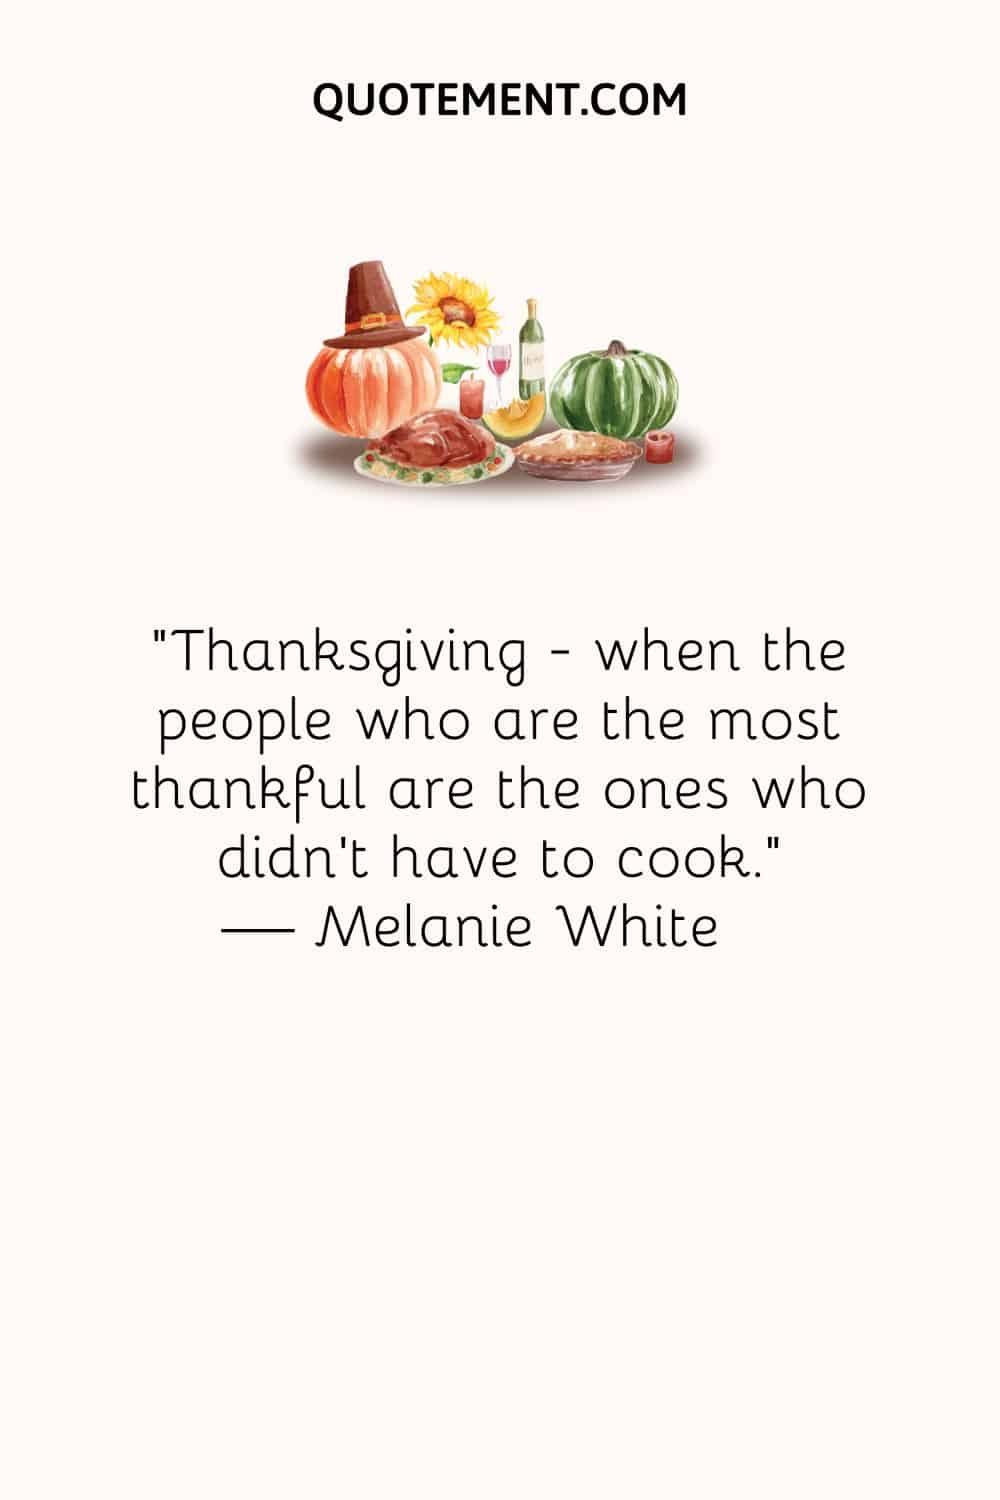 Thanksgiving - when the people who are the most thankful are the ones who didn’t have to cook